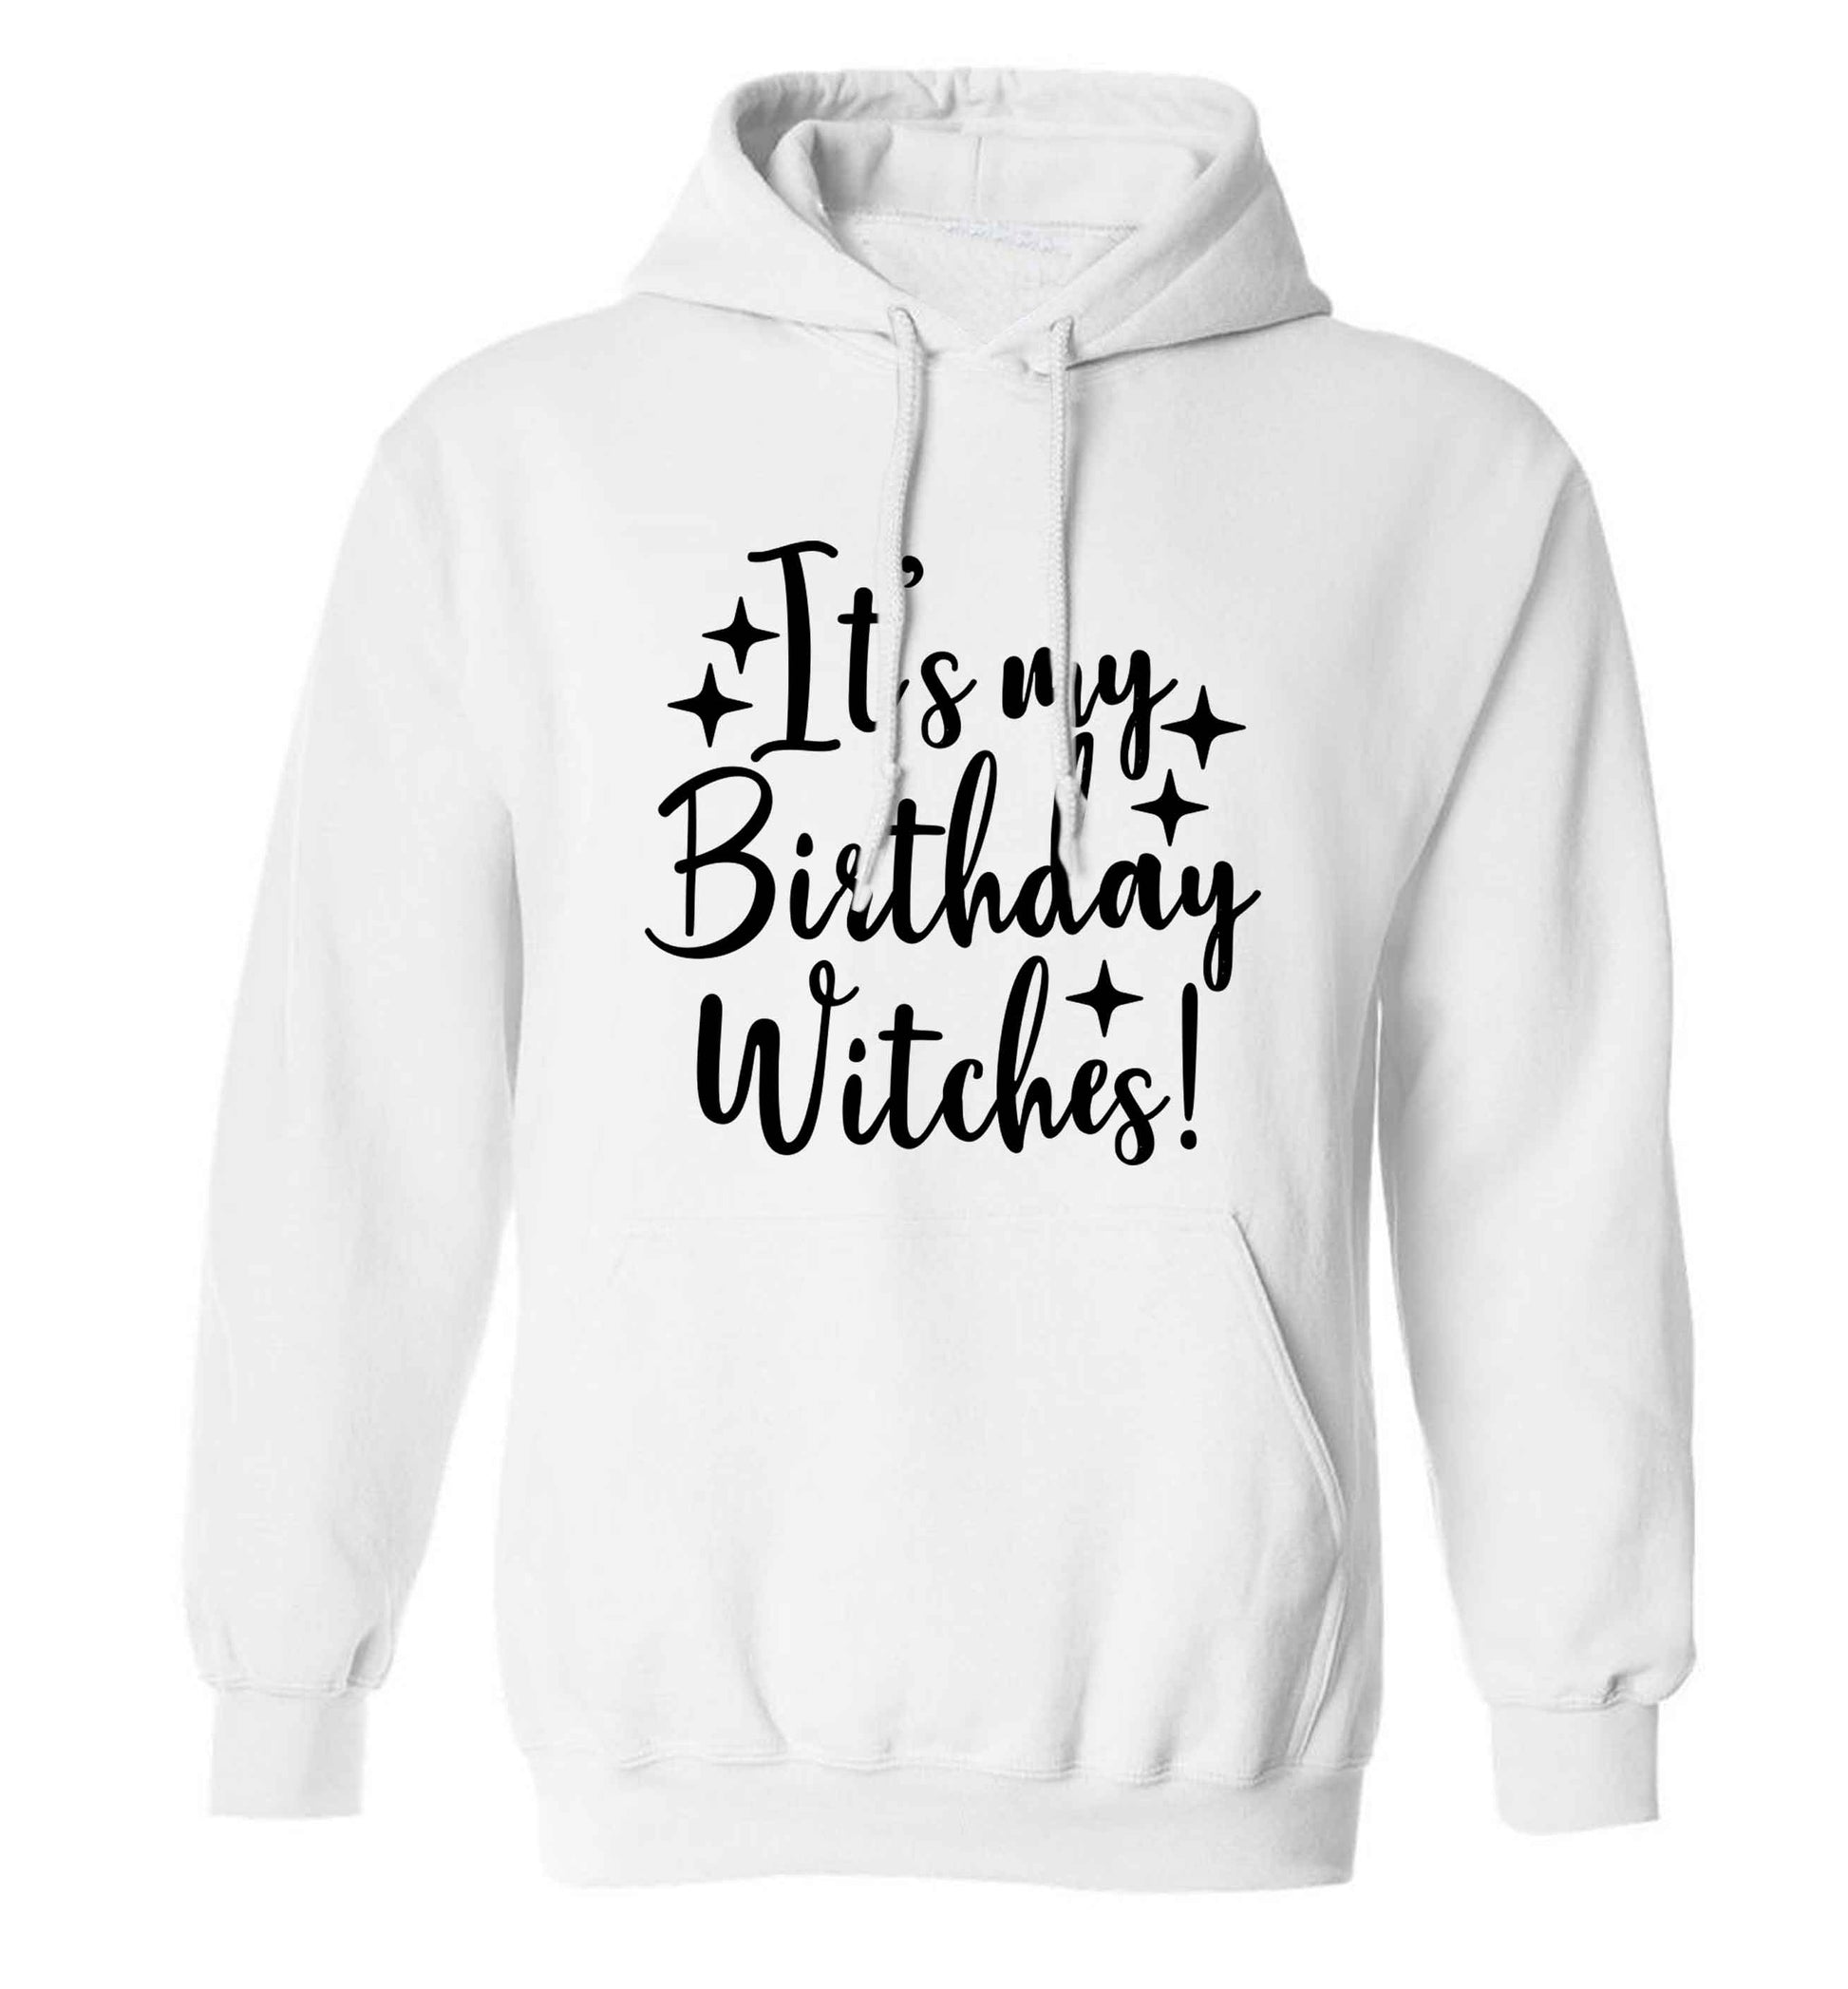 It's my birthday witches!adults unisex white hoodie 2XL